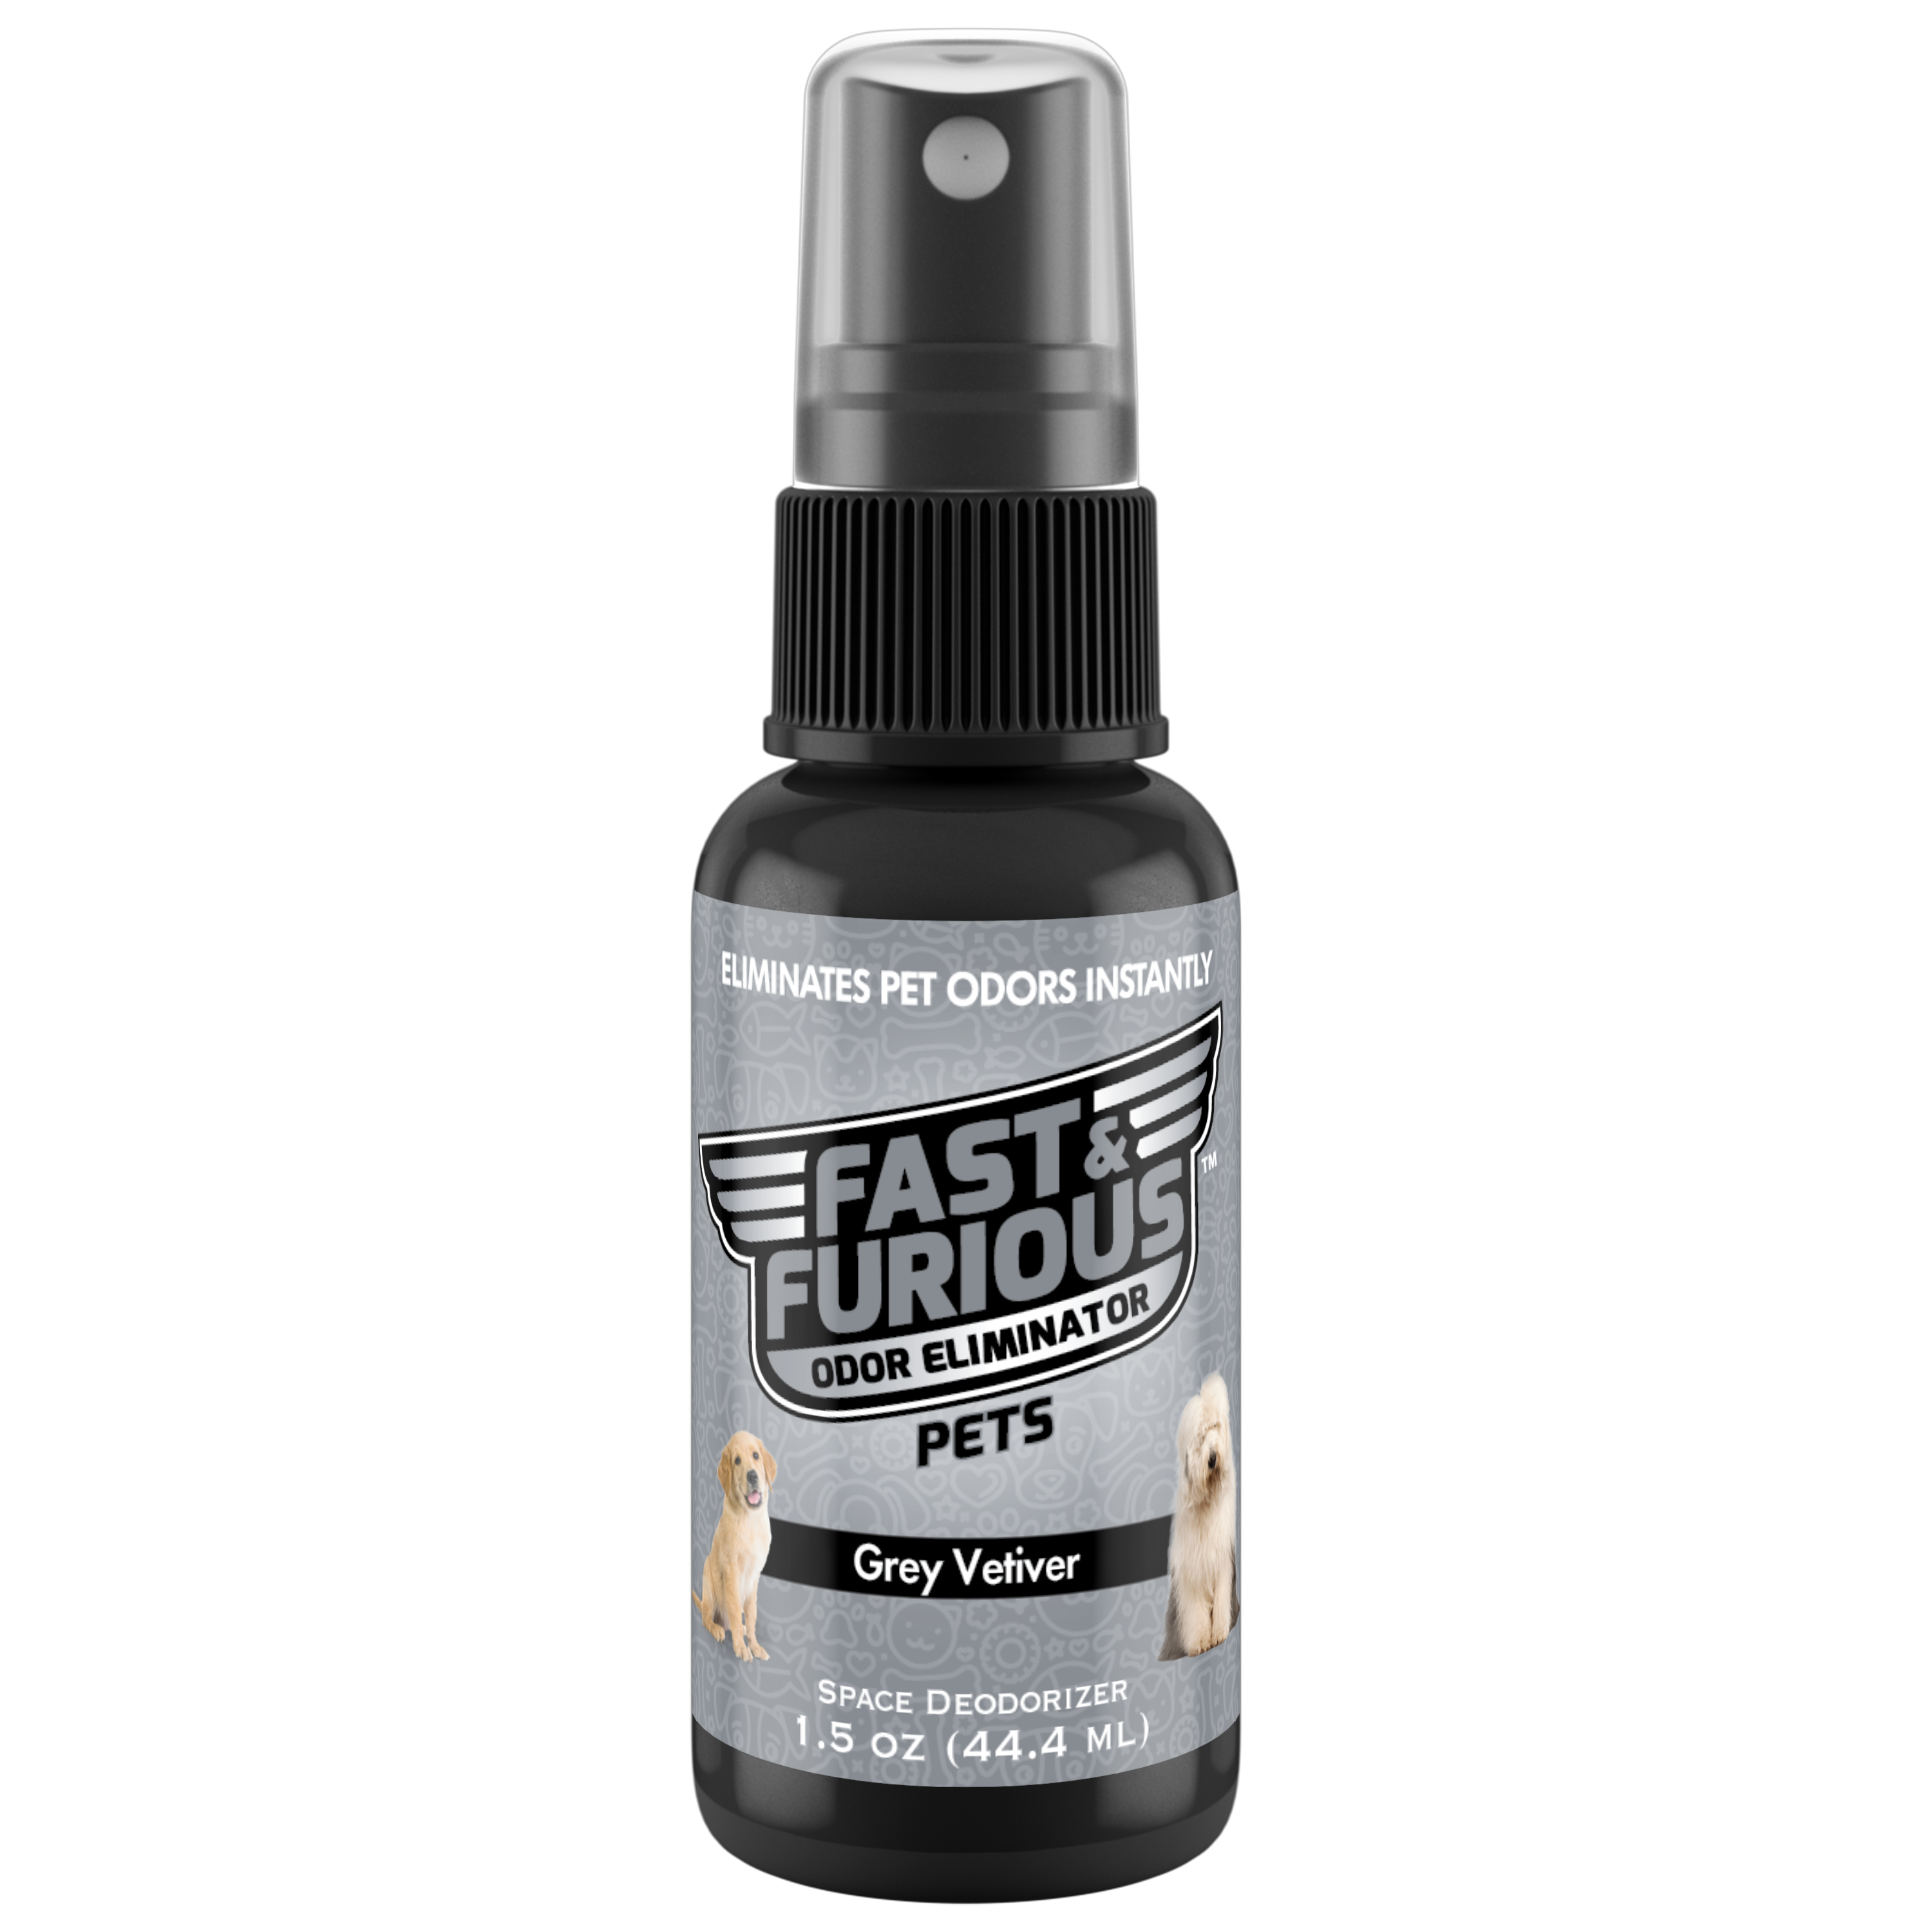 Fast and Furious Pets Odor Eliminator - Grey Vetiver Scent